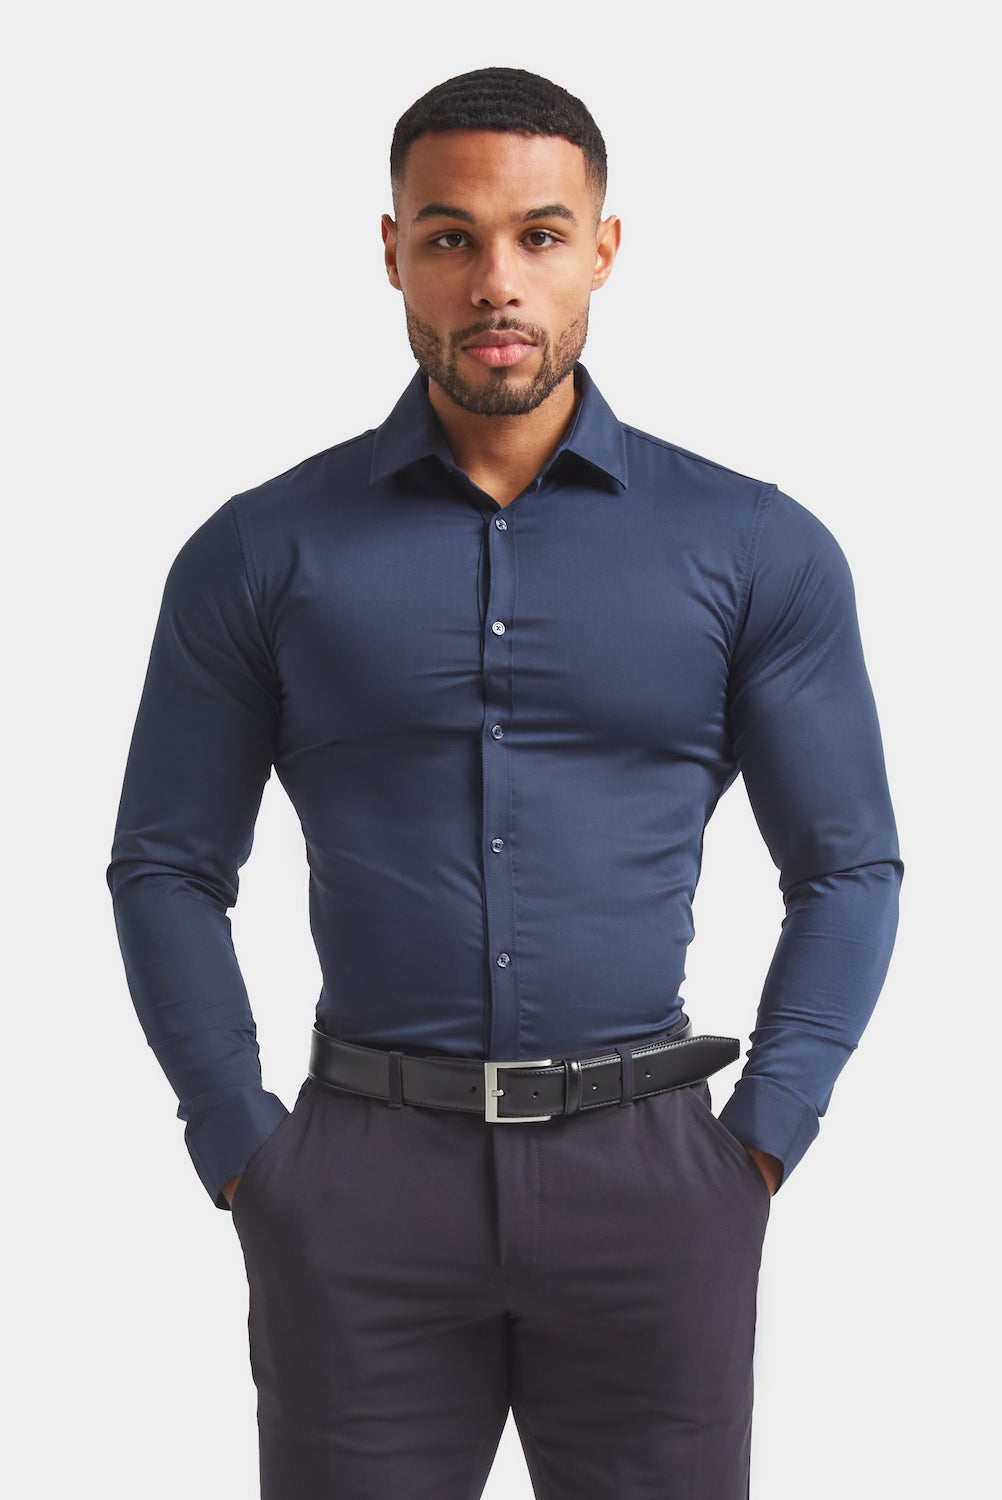 Basic Formal Shirts Collection from FITTED for Men